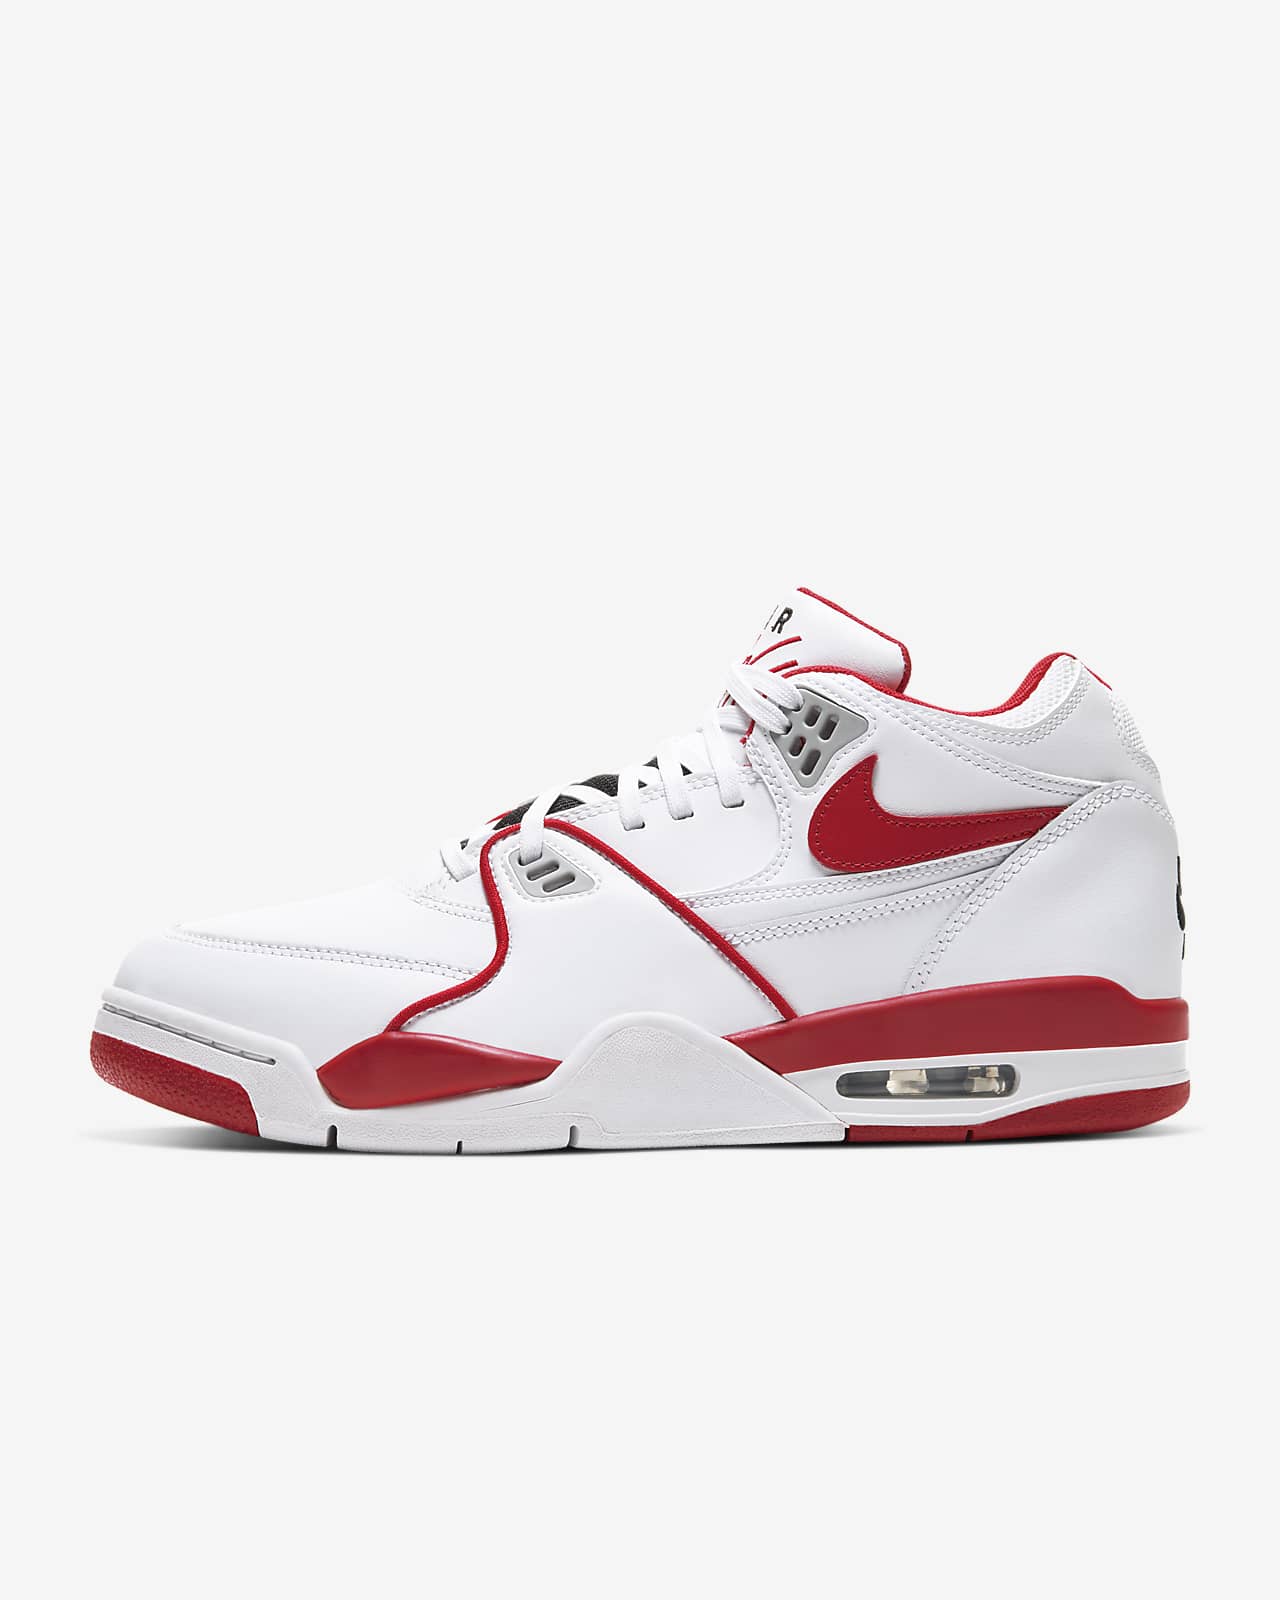 Nike Air Max 89 Outlet Sale, UP TO 62% OFF